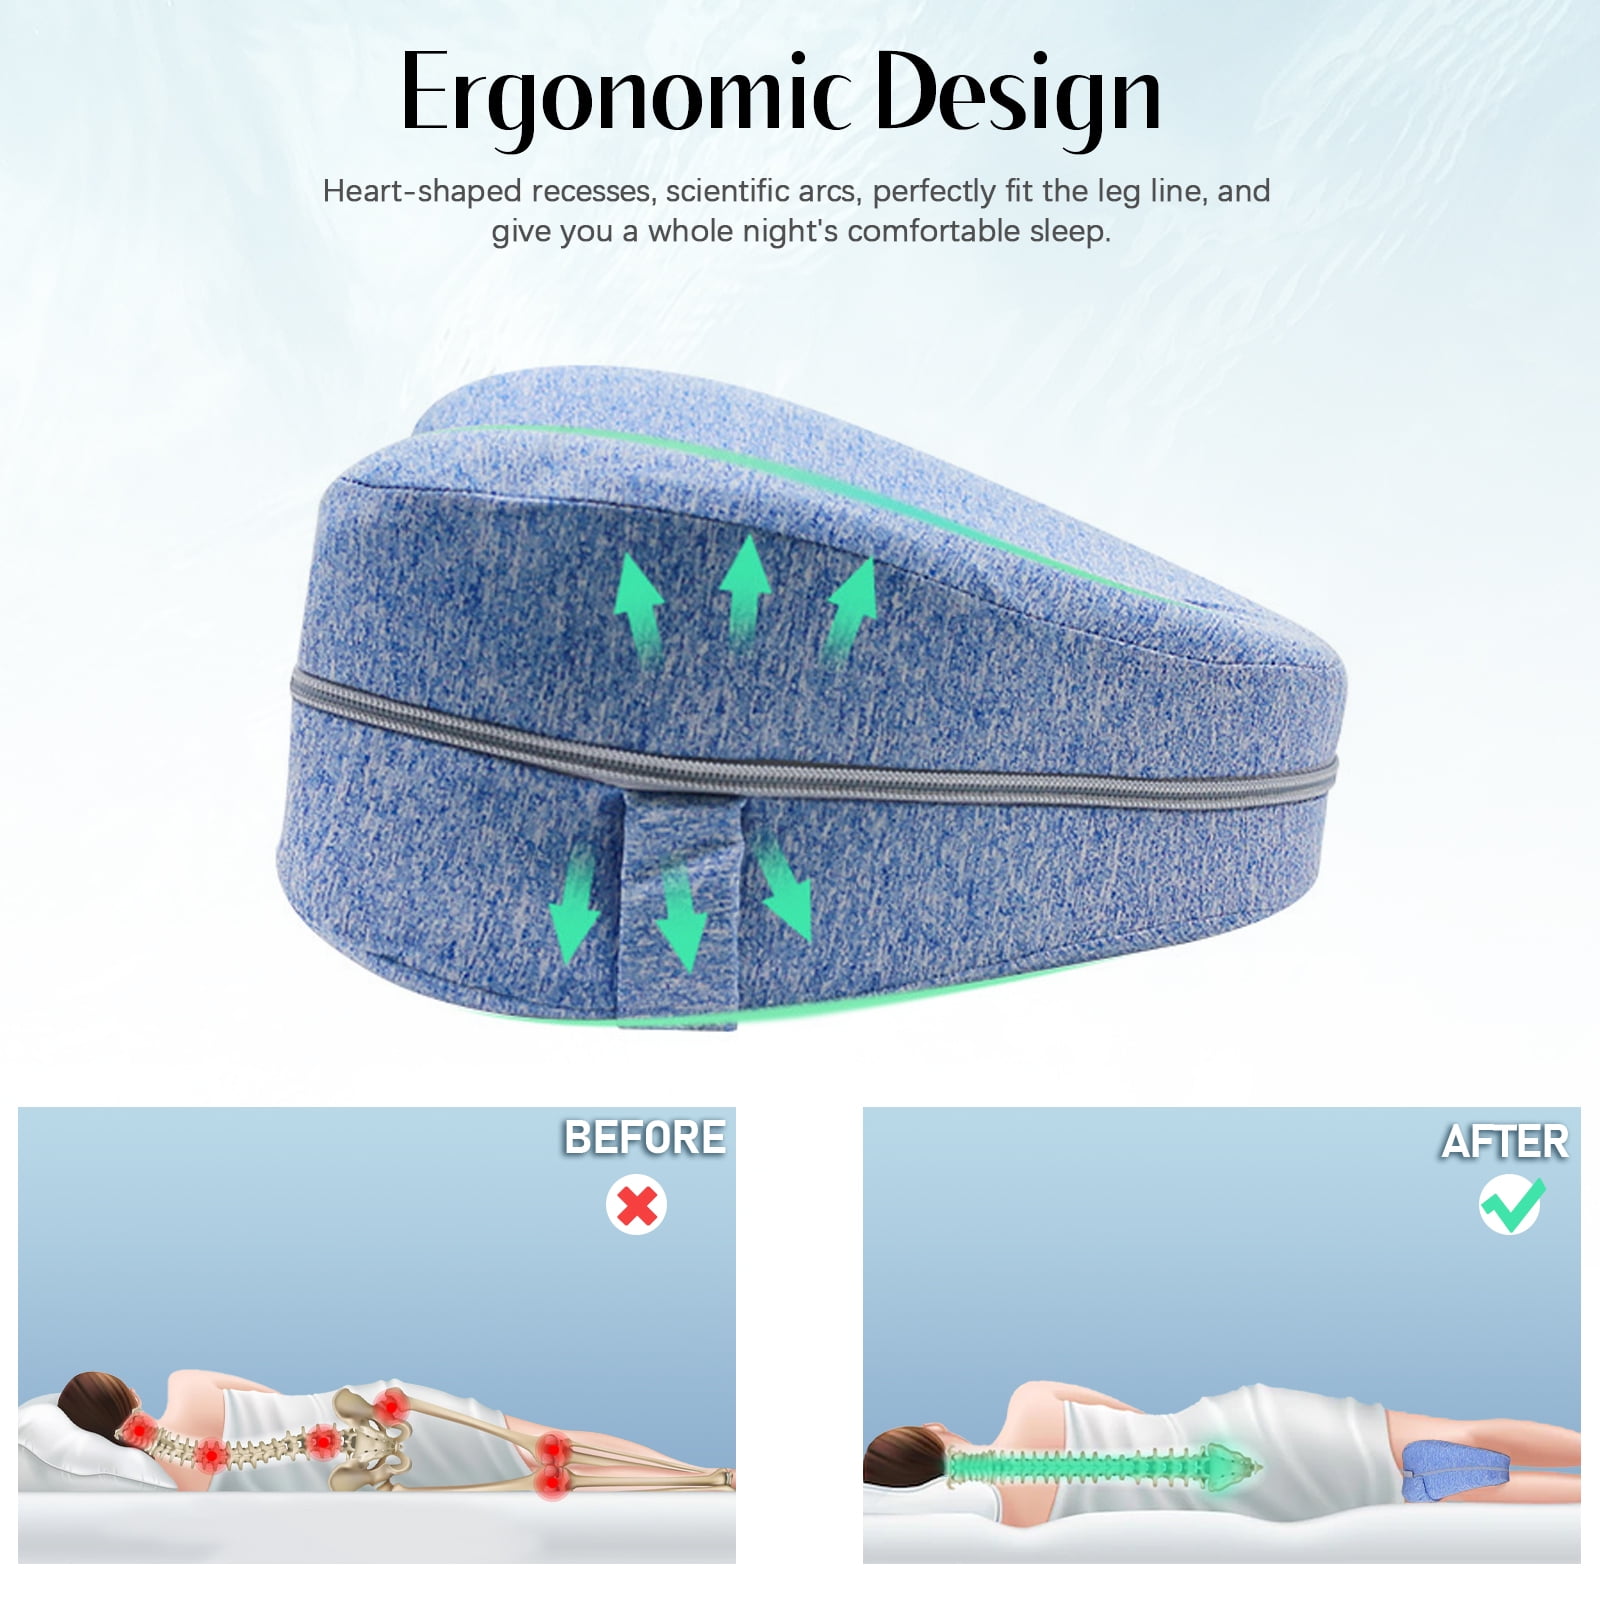  Smoothspine, Smoothspine Alignment Pillow, Relieve Hip